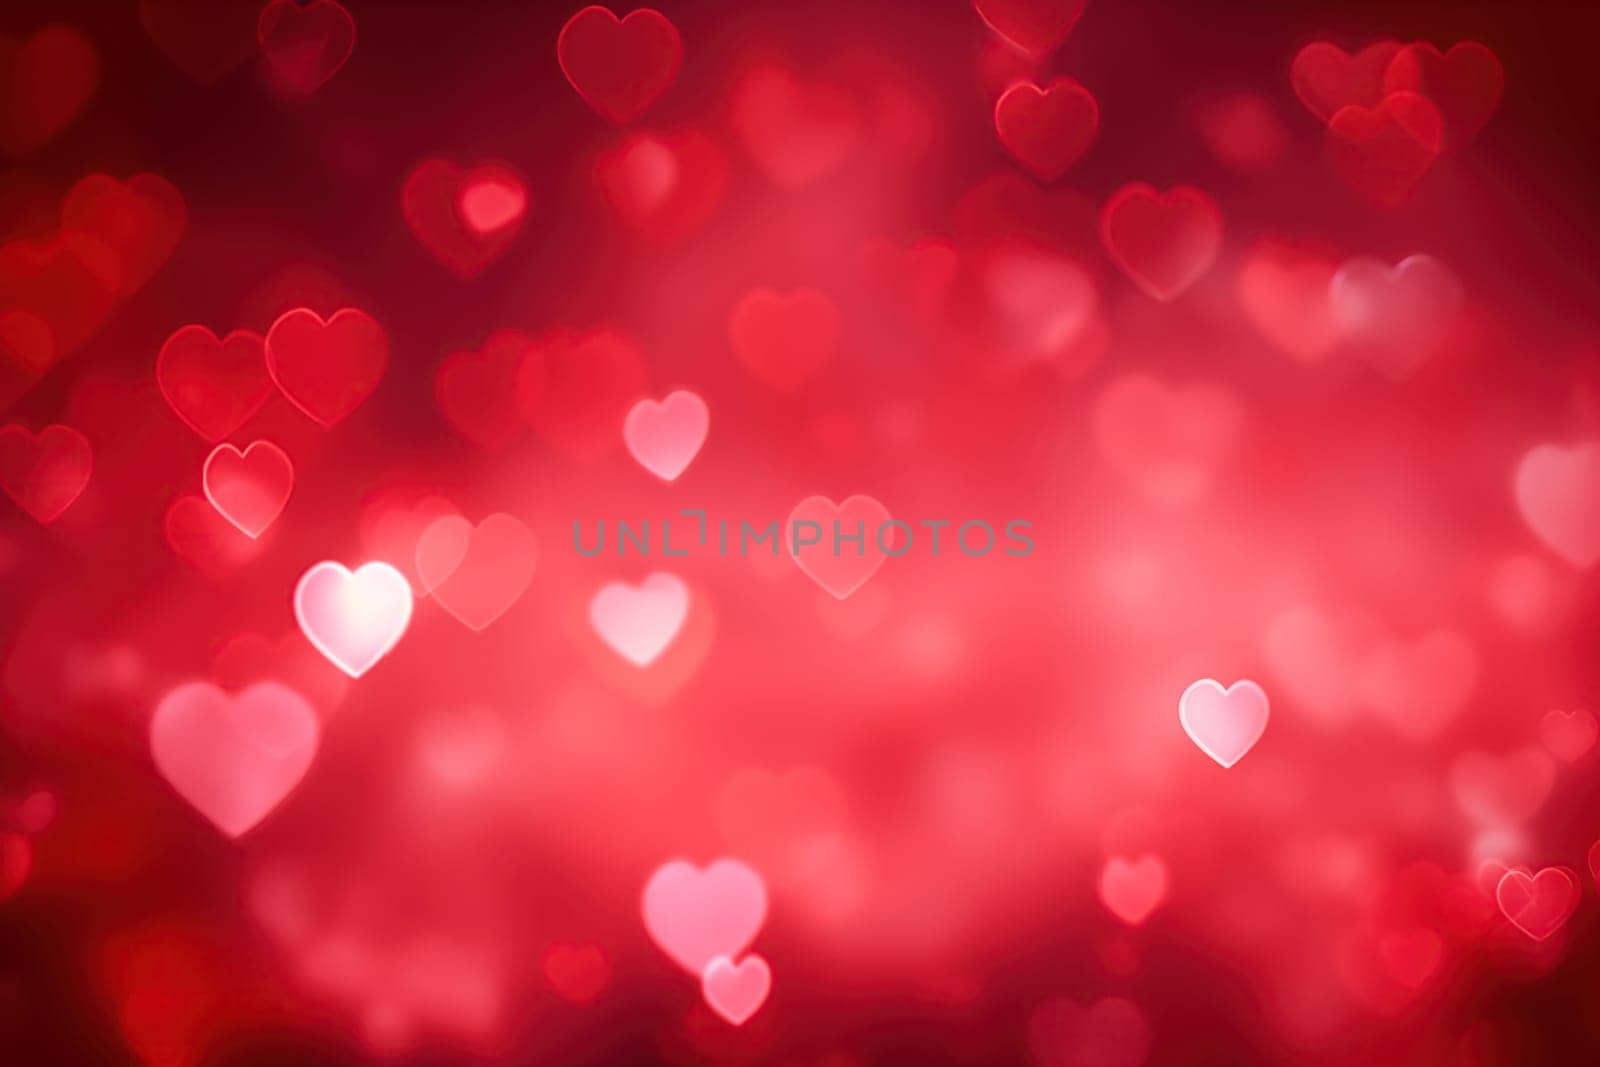 A romantic and dreamy background featuring heart-shaped bokeh lights, perfect for Valentine Day or love-themed designs